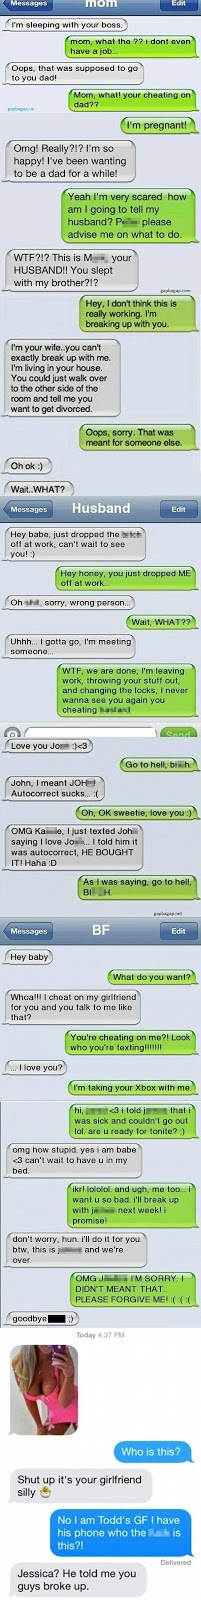 #LOL: Top 8 Hilarious Text Messages By Cheaters ft. Wrong Person